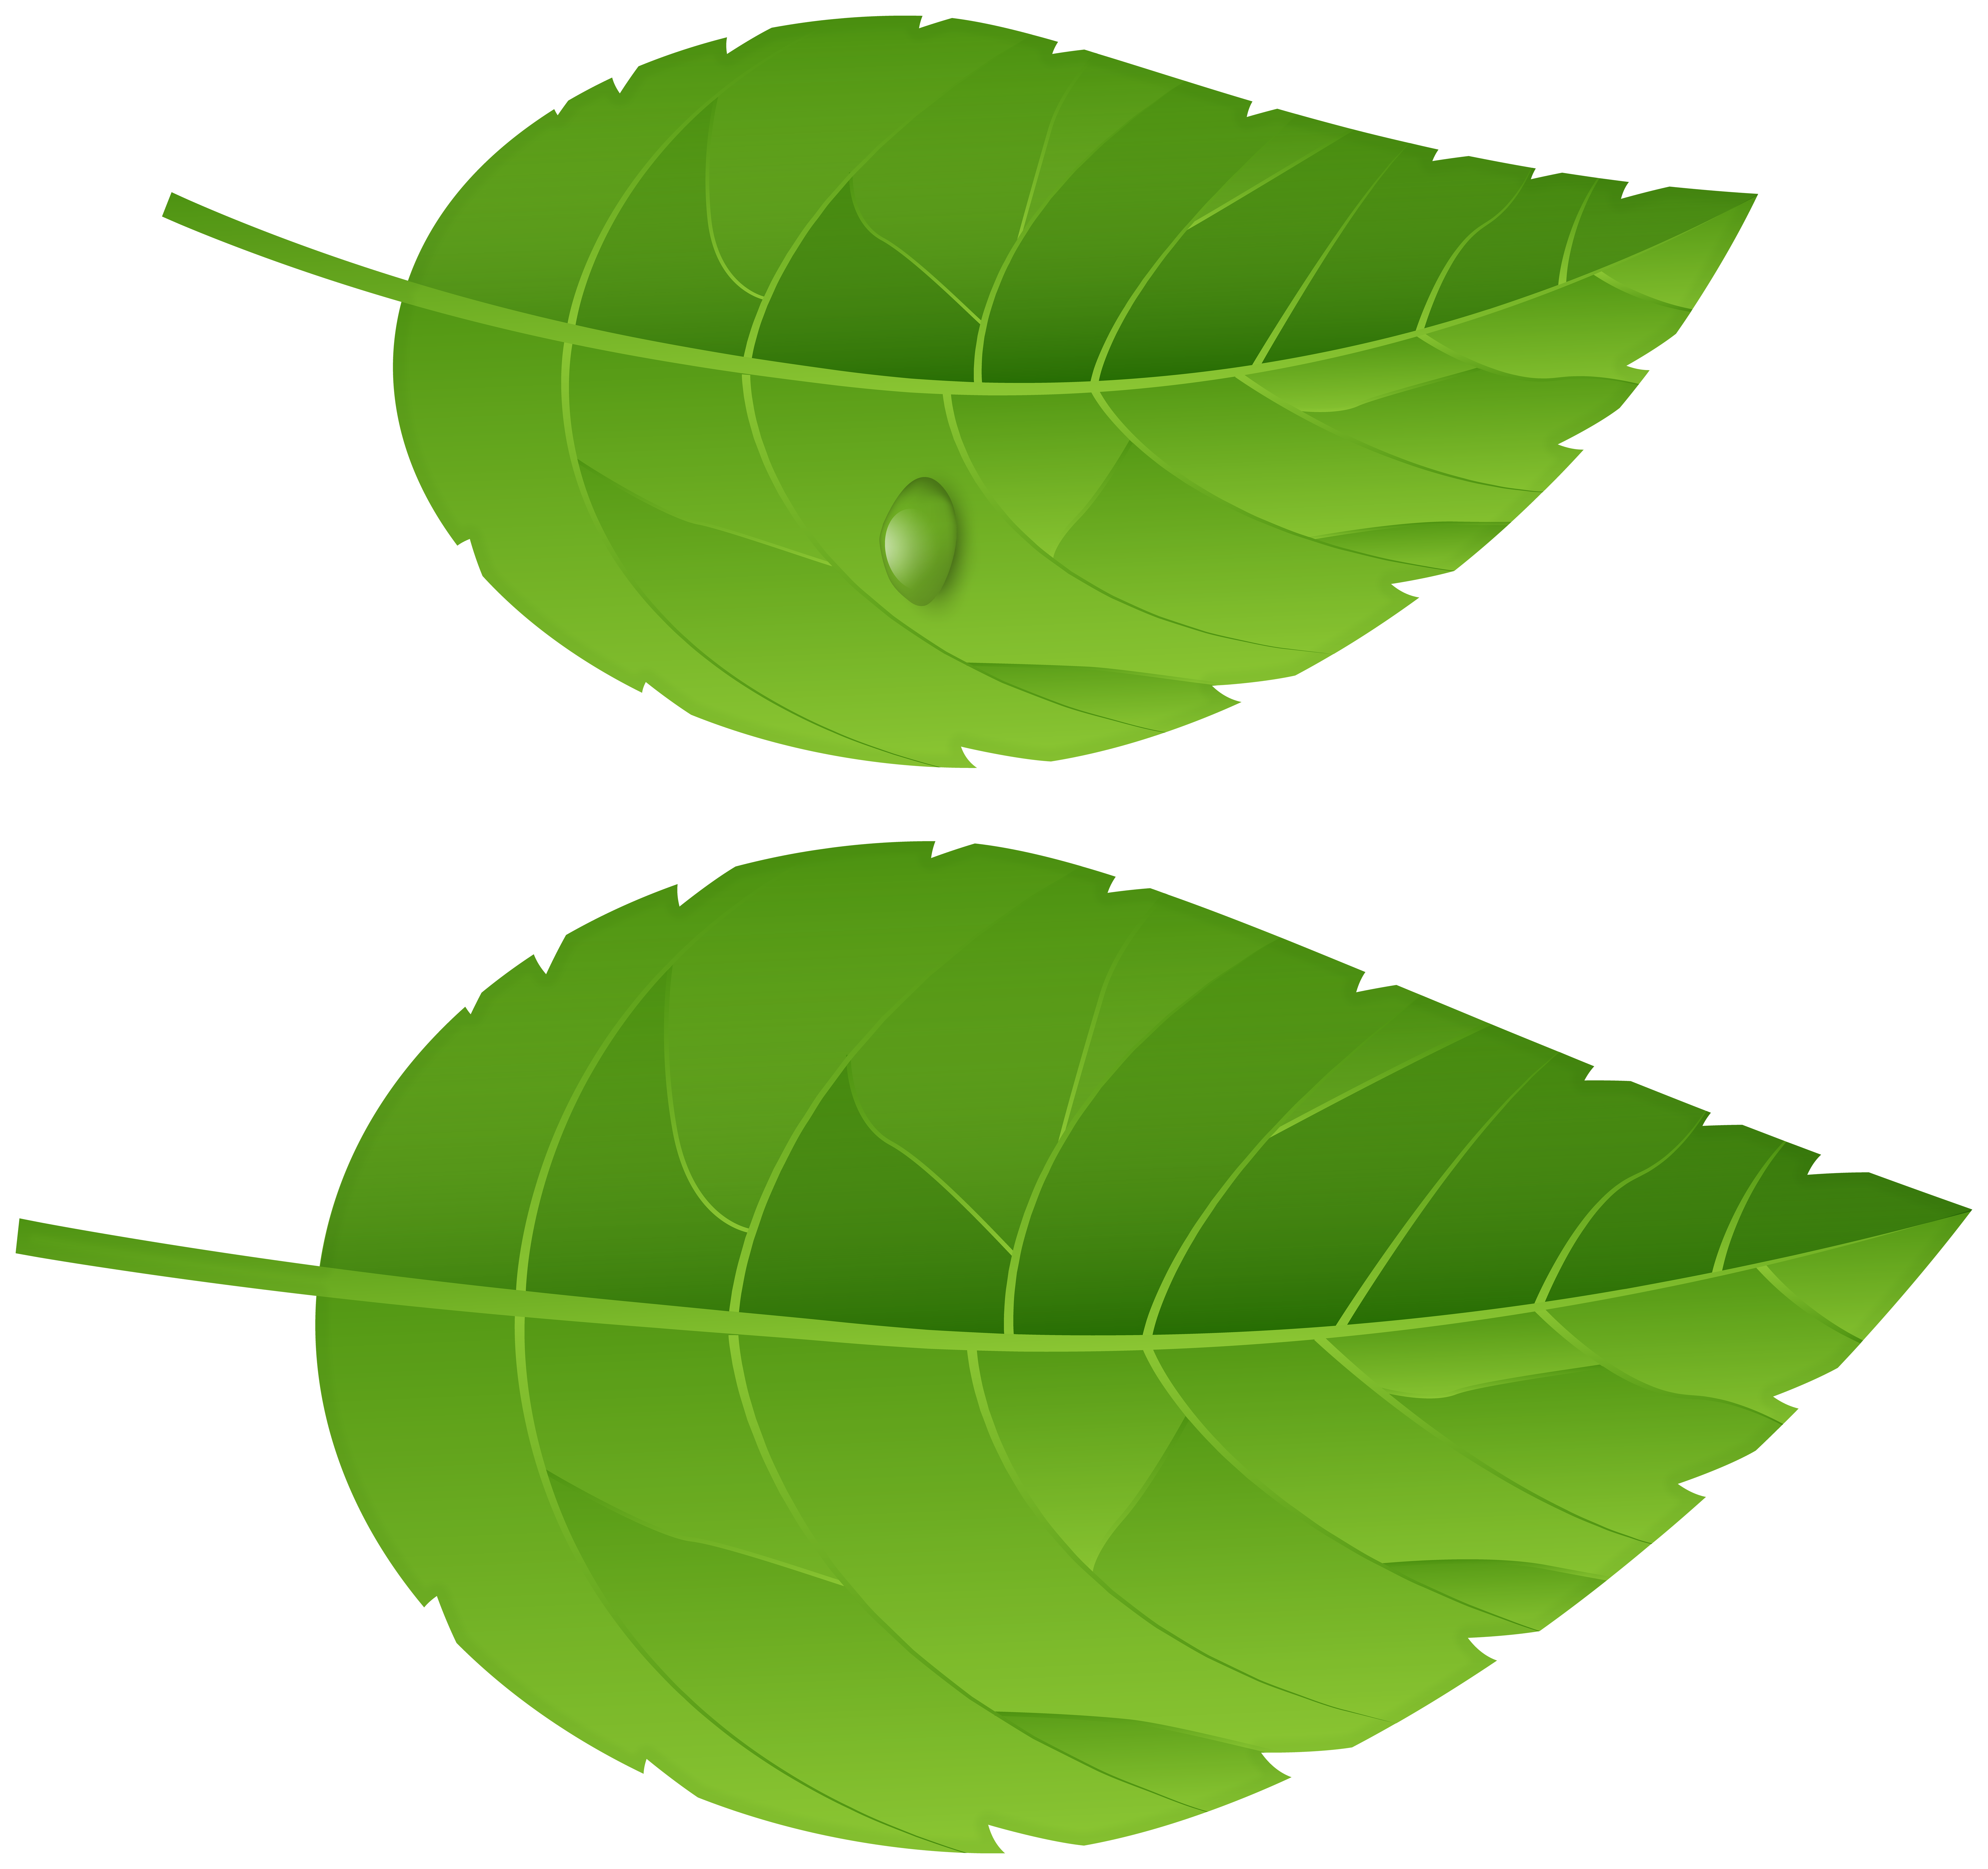 https://gallery.yopriceville.com/var/albums/Free-Clipart-Pictures/Decorative-Elements-PNG/Green_Leaves_PNG_Transparent_Image.png?m=1552616513